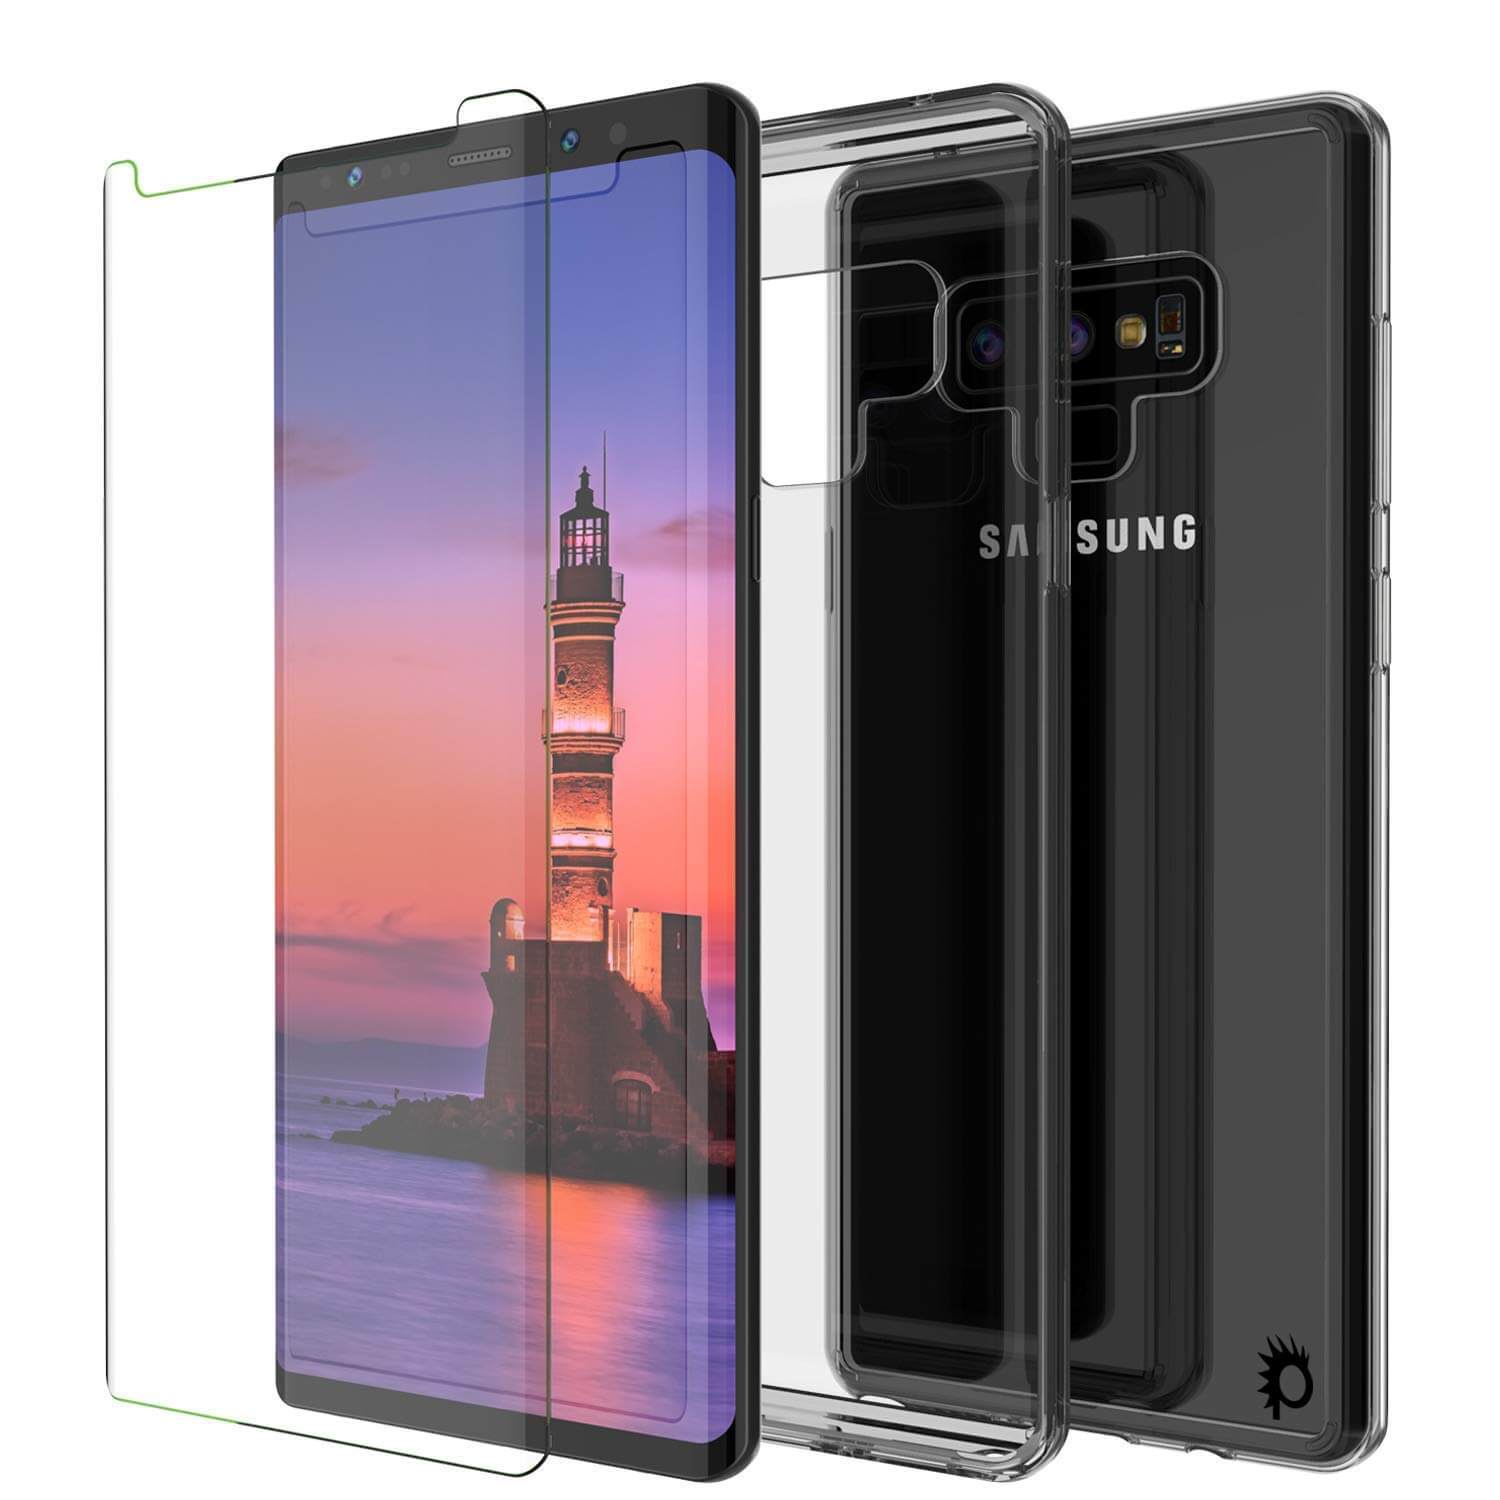 Galaxy Note 9 Case, PUNKcase [LUCID 2.0 Series] [Slim Fit] Armor Cover W/Integrated Anti-Shock System [Crystal Black] - PunkCase NZ